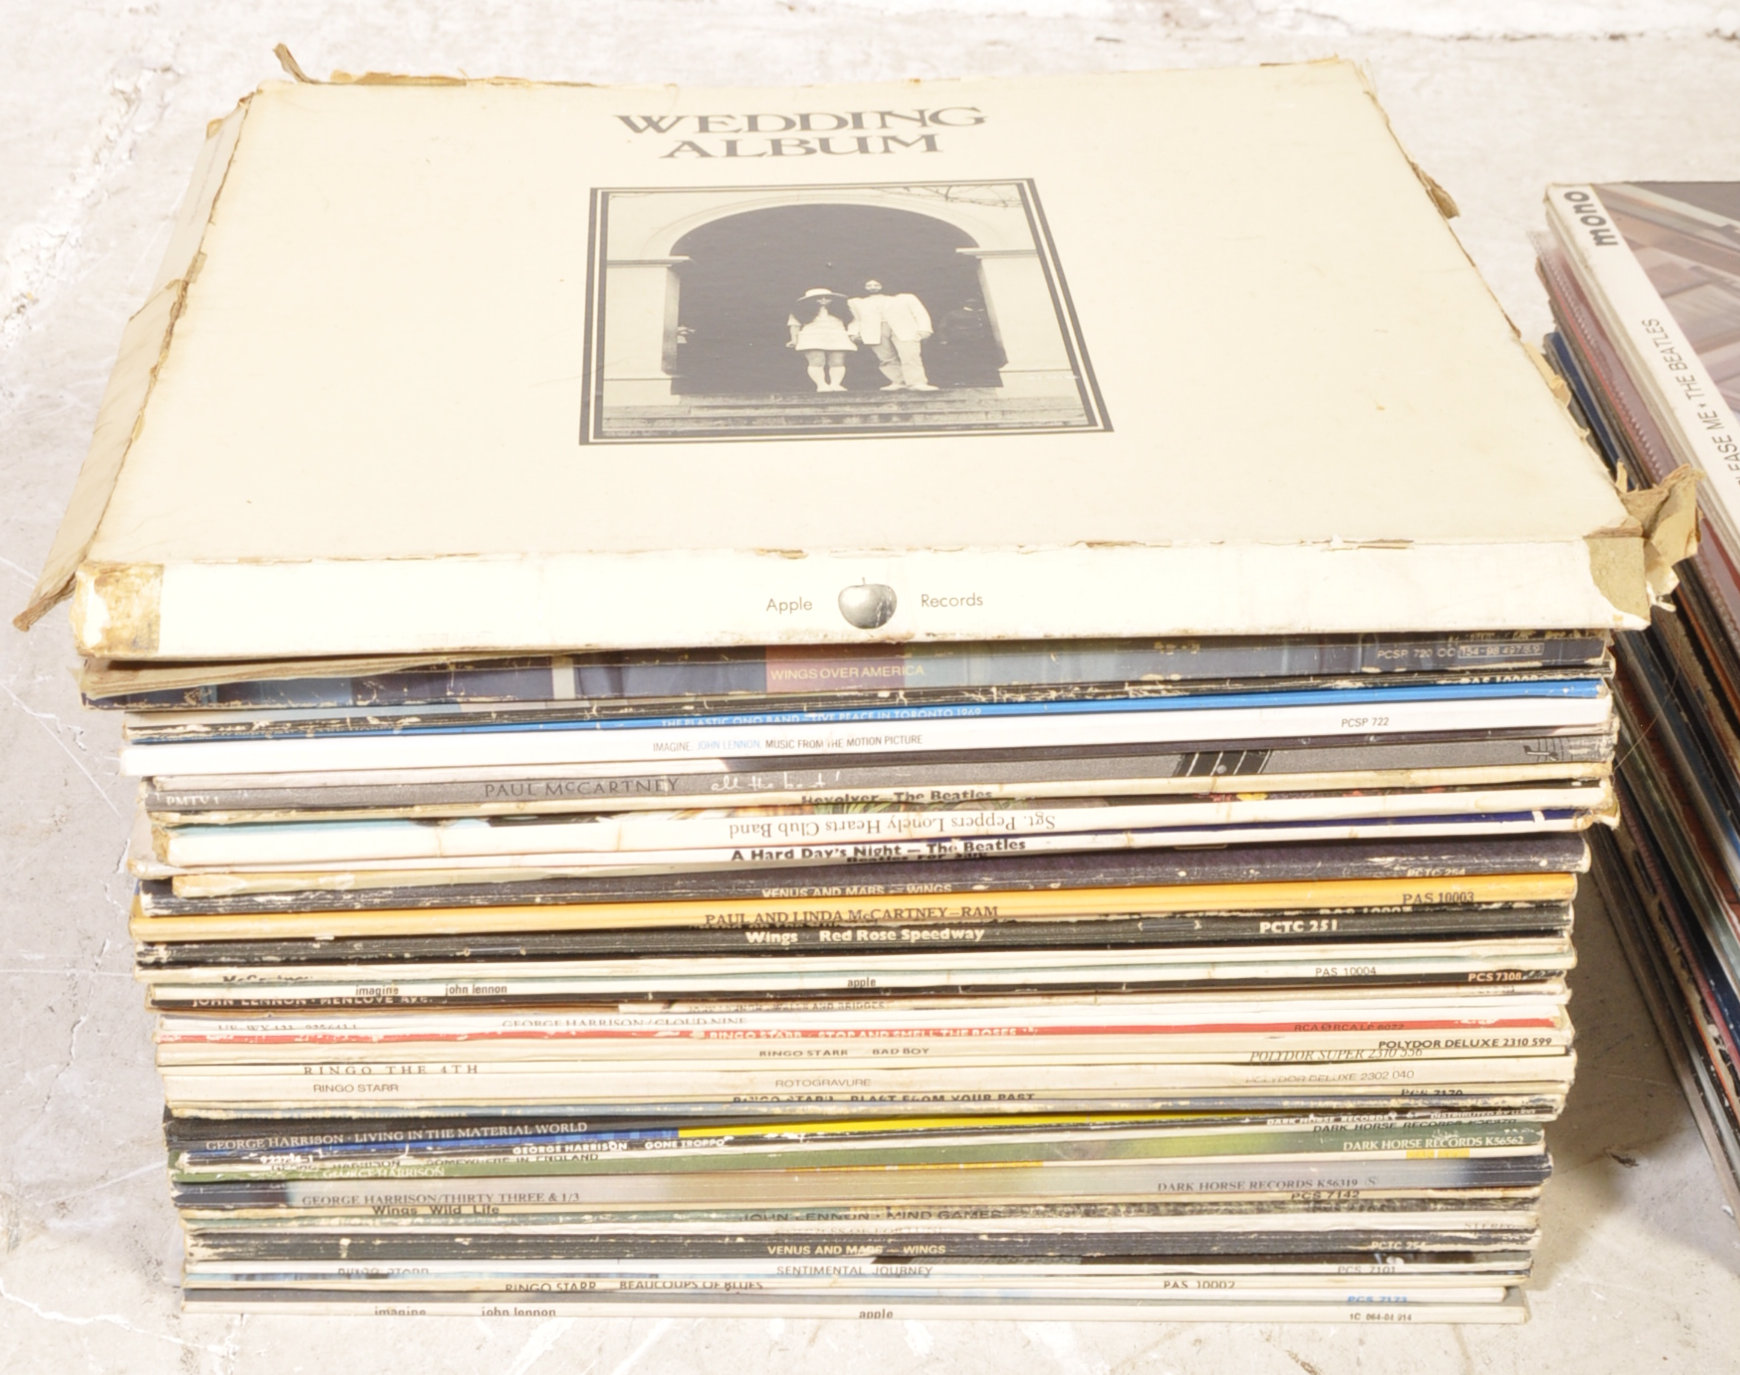 THE BEATLES & RELATED - COLLECTION OF 70+ VINYL RECORDS - Image 10 of 12